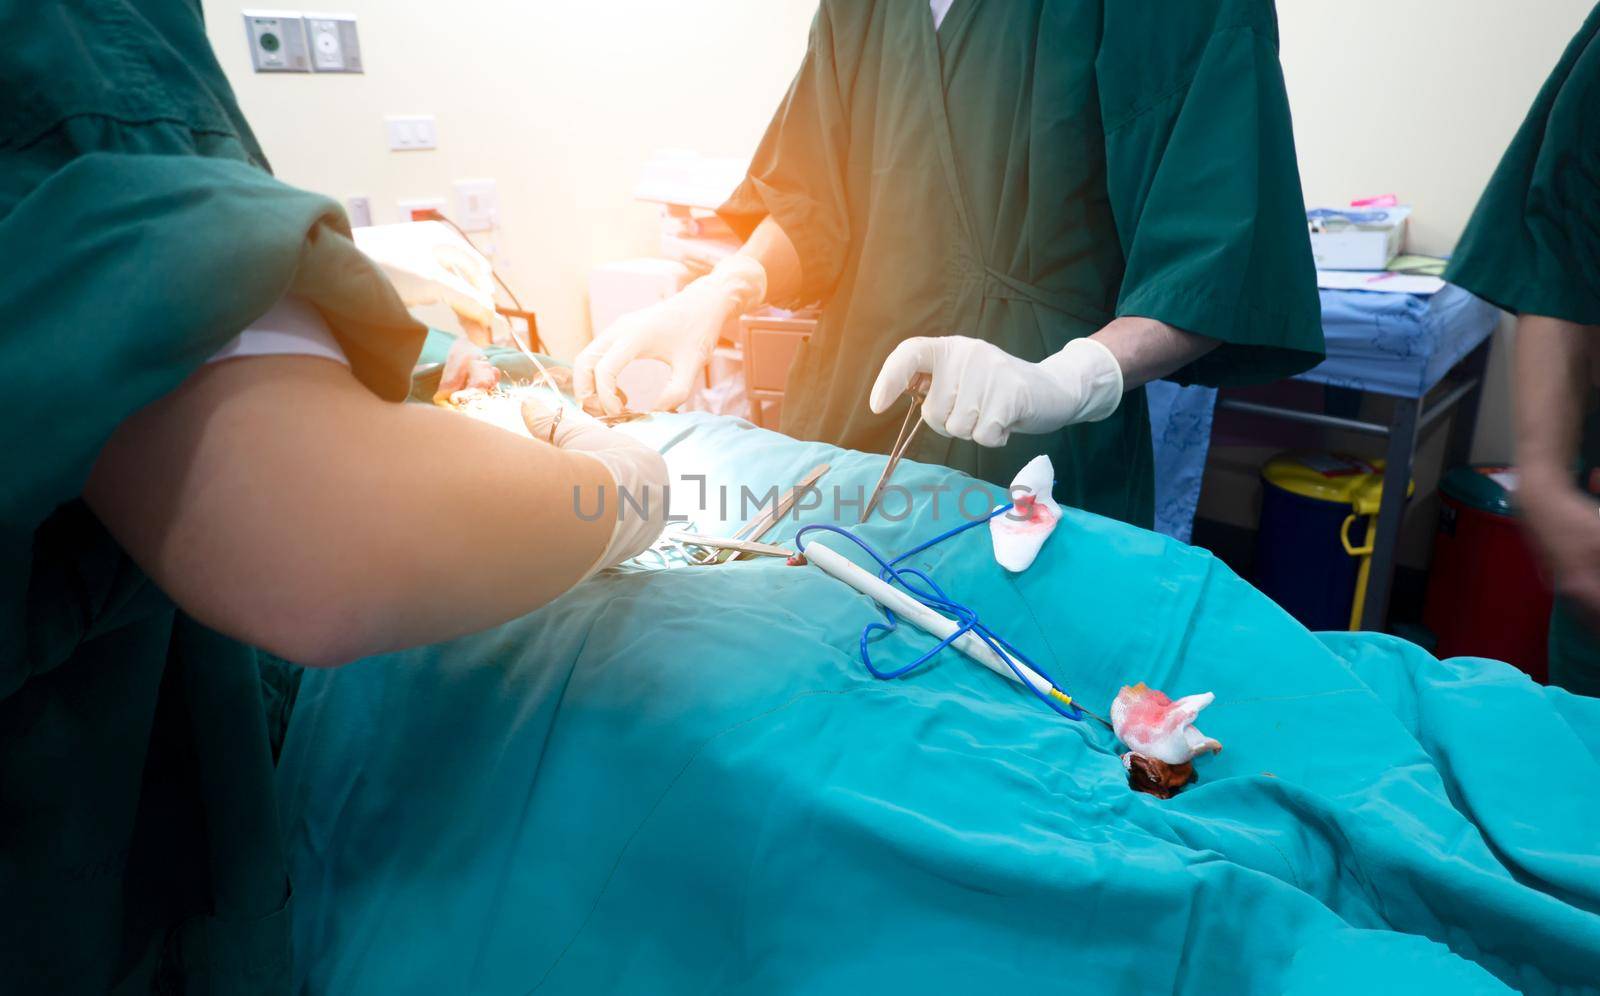 Midsection of surgery team operating Medical Team Performing Surgical Operation in Modern Operating Room
or Group of surgeons in operating room with surgery equipment. by chuanchai